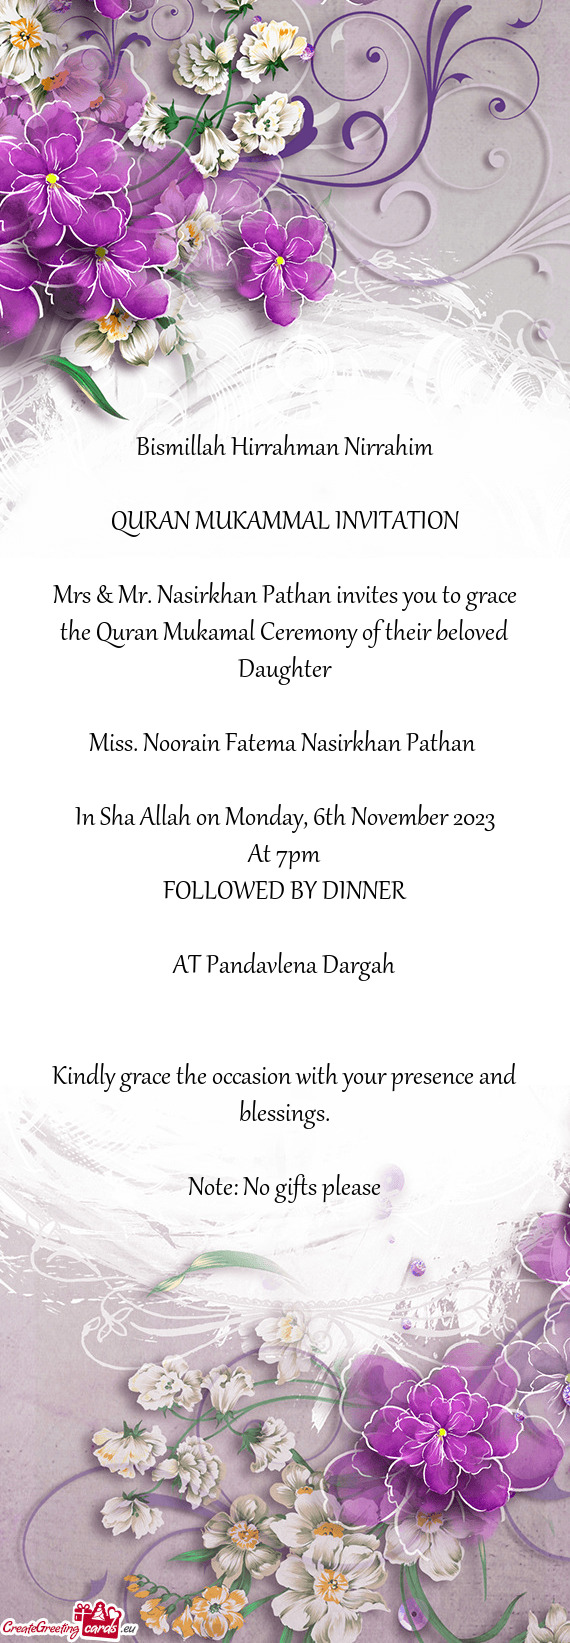 Mrs & Mr. Nasirkhan Pathan invites you to grace the Quran Mukamal Ceremony of their beloved Daughter